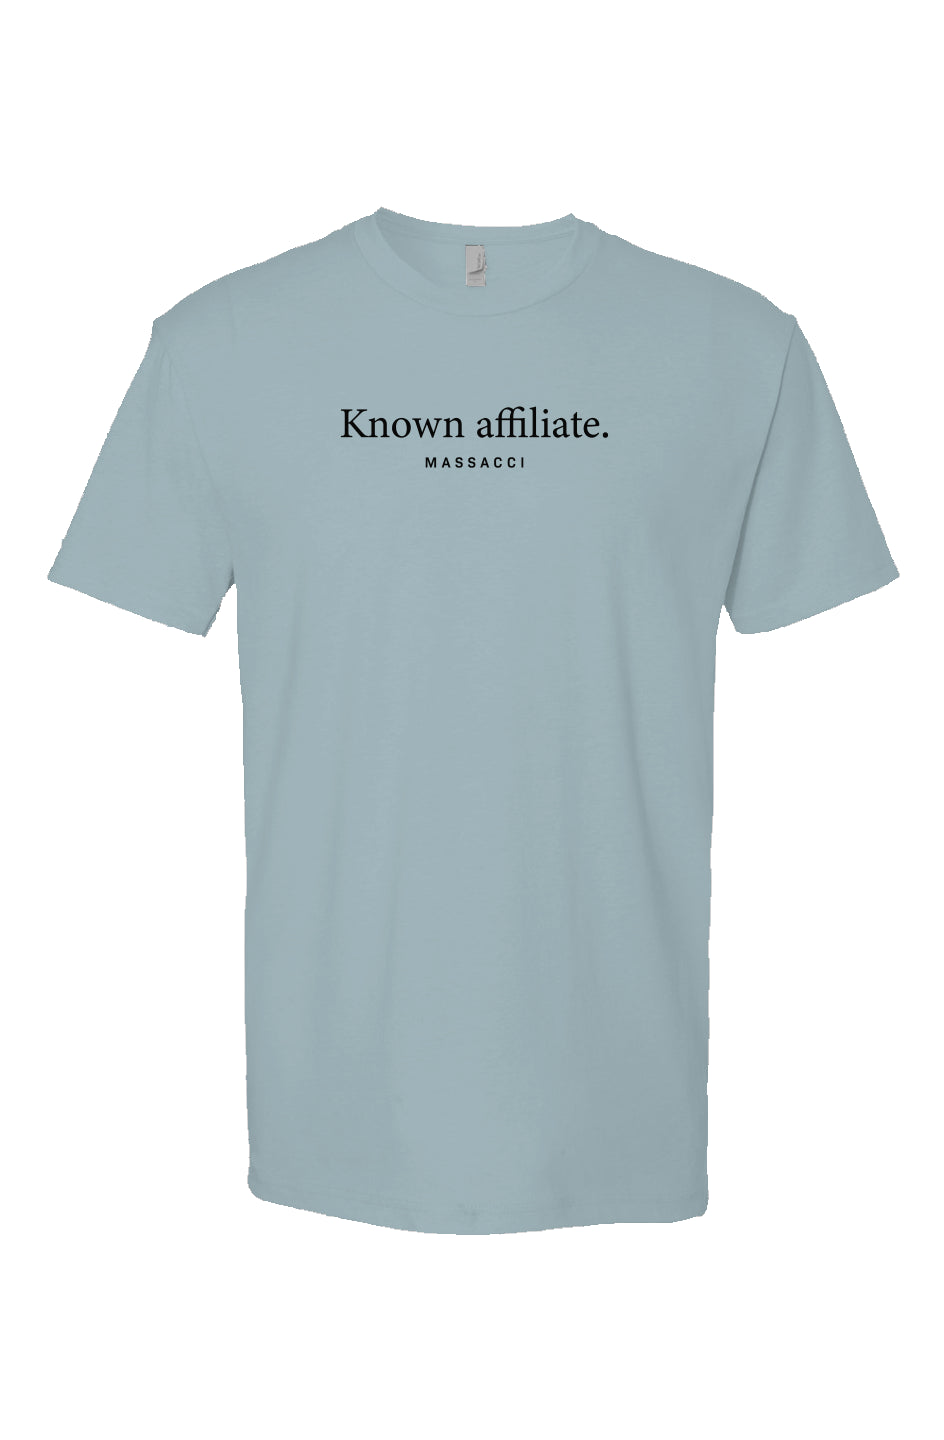 Known affiliate, Short Sleeve T shirt